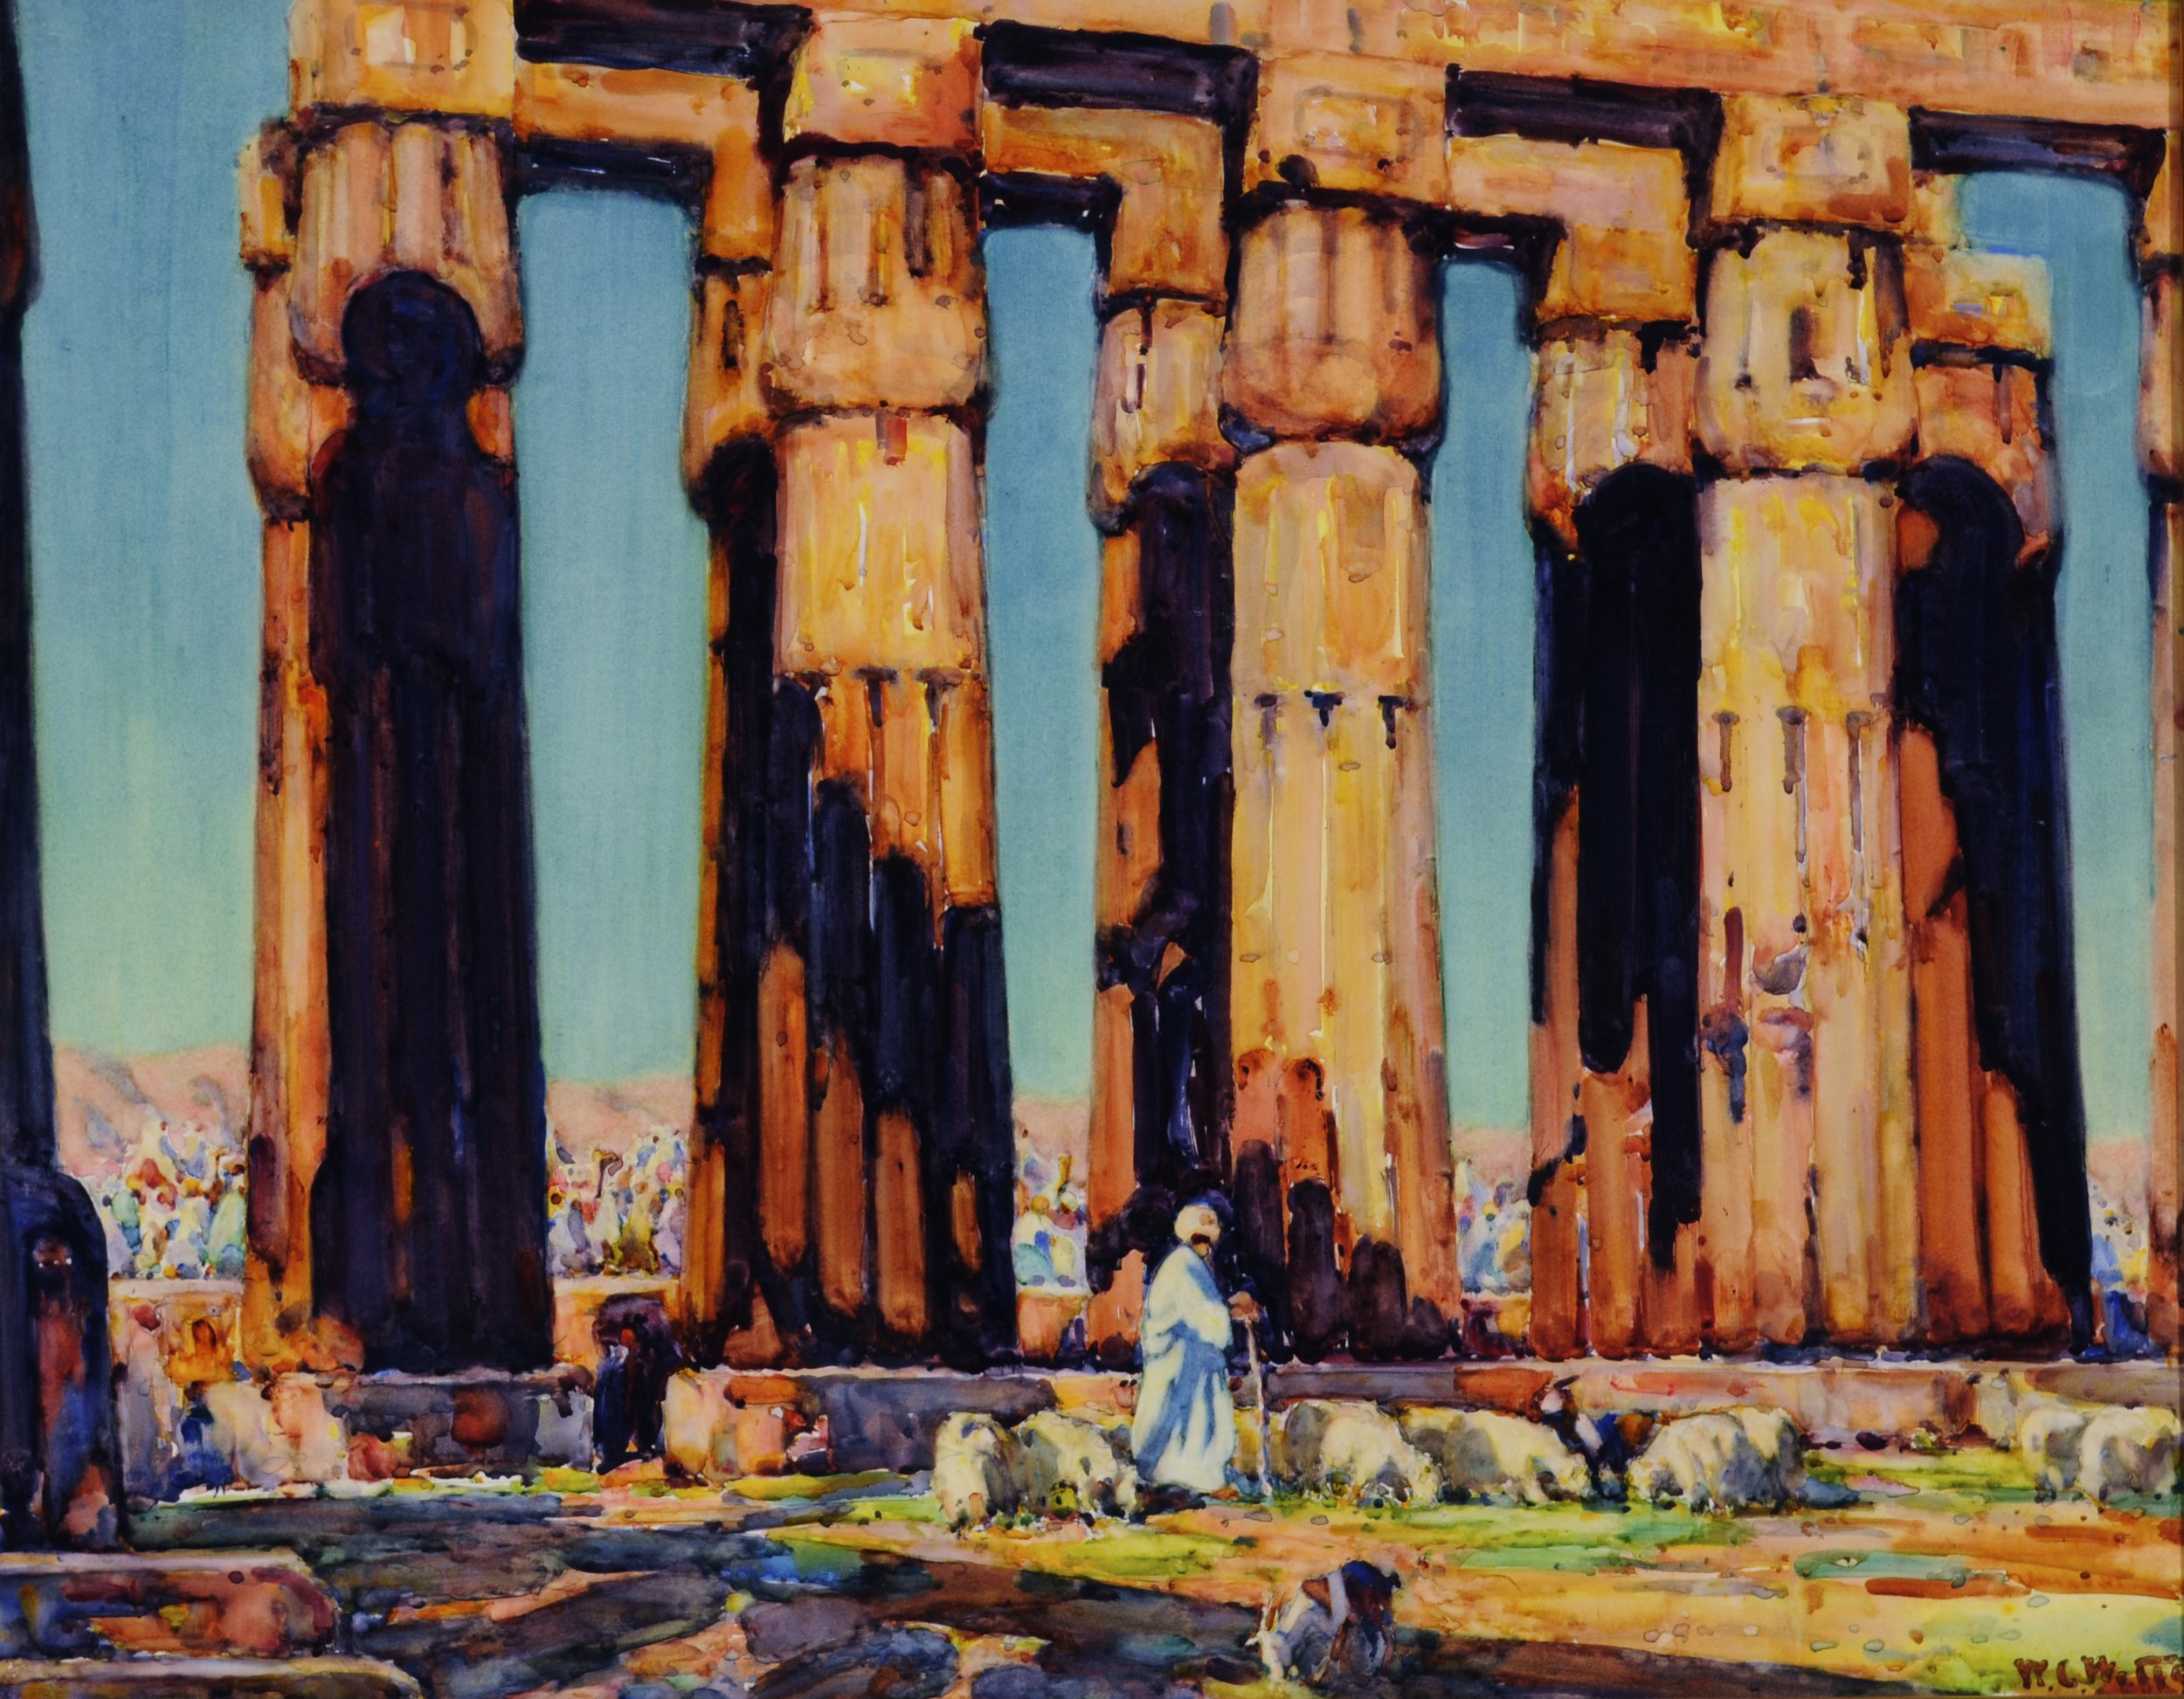  William Clothier Watts,  Grazing Sheep, Temple of Luxor, Egypt , c. 1915, Watercolor on paper. The Jean and Graham Devoe Williford Charitable Trust. 